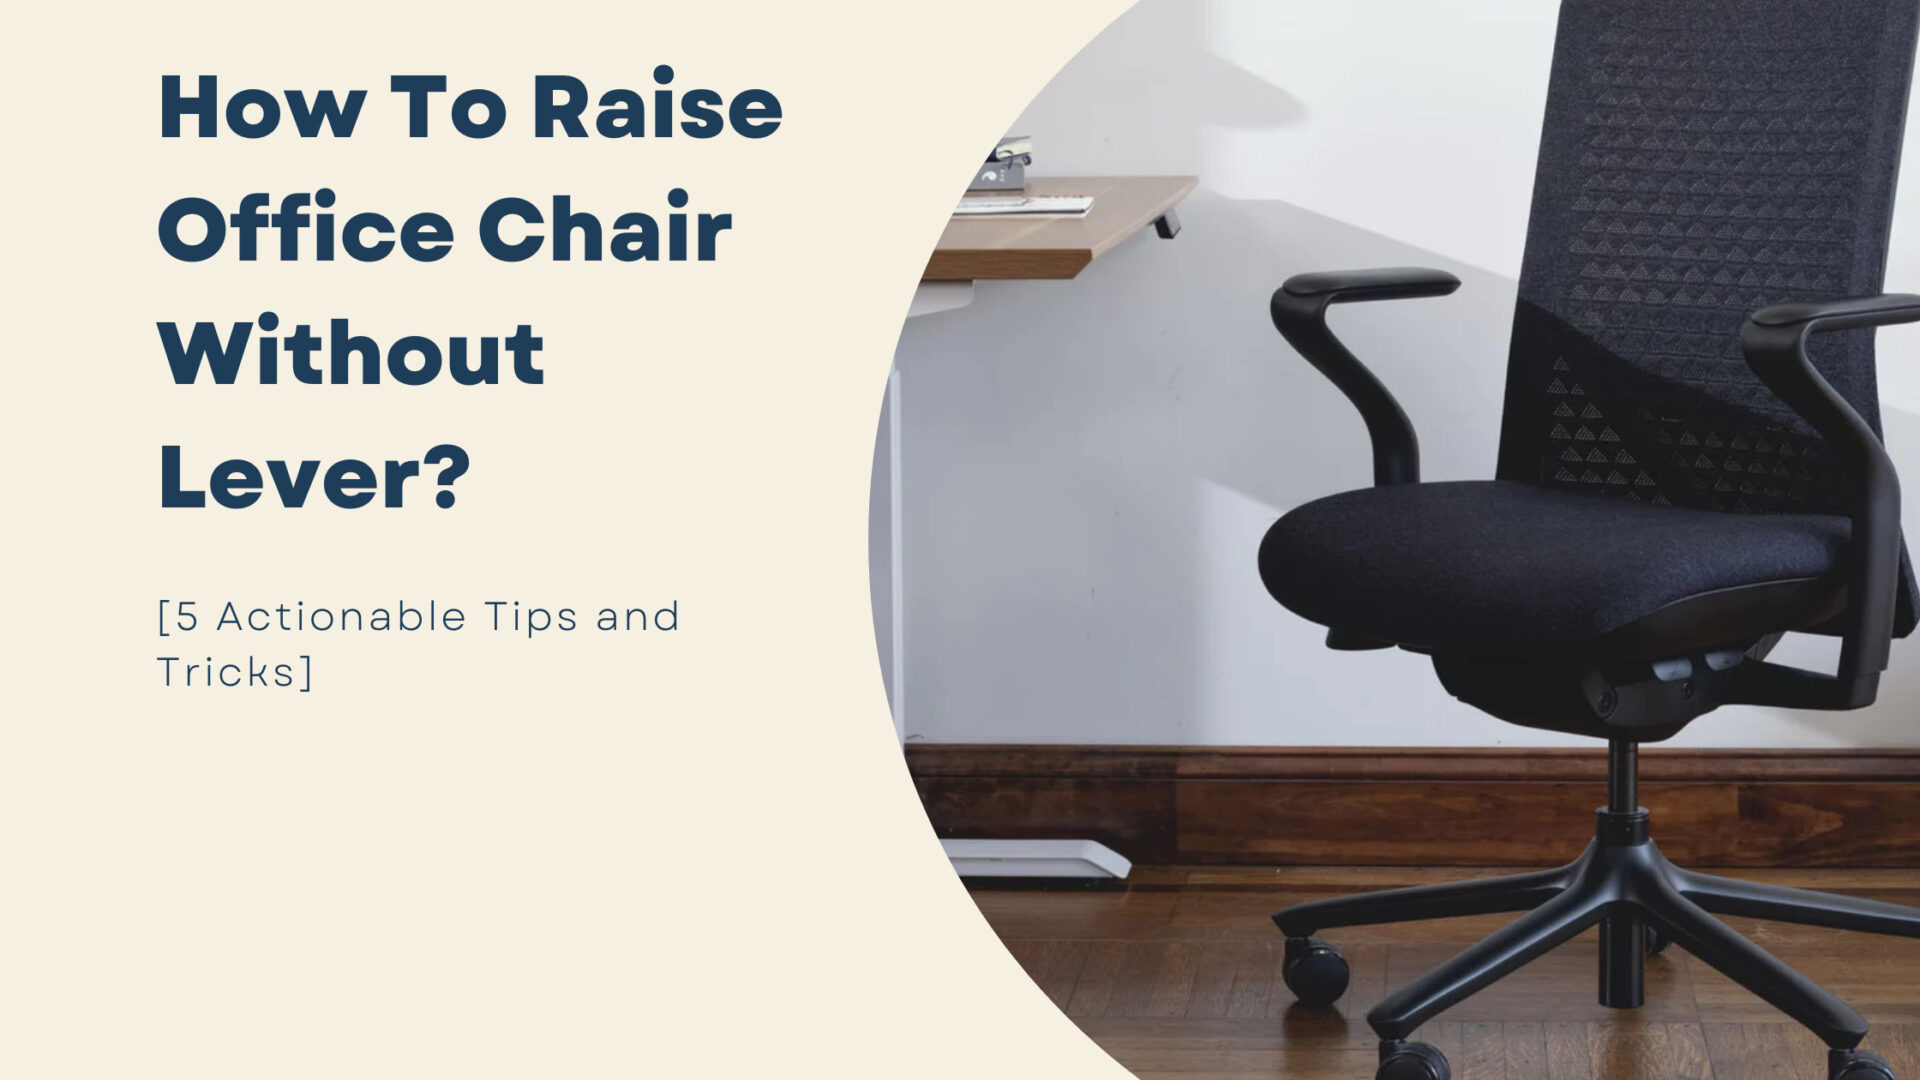 How To Raise Office Chair Without Lever